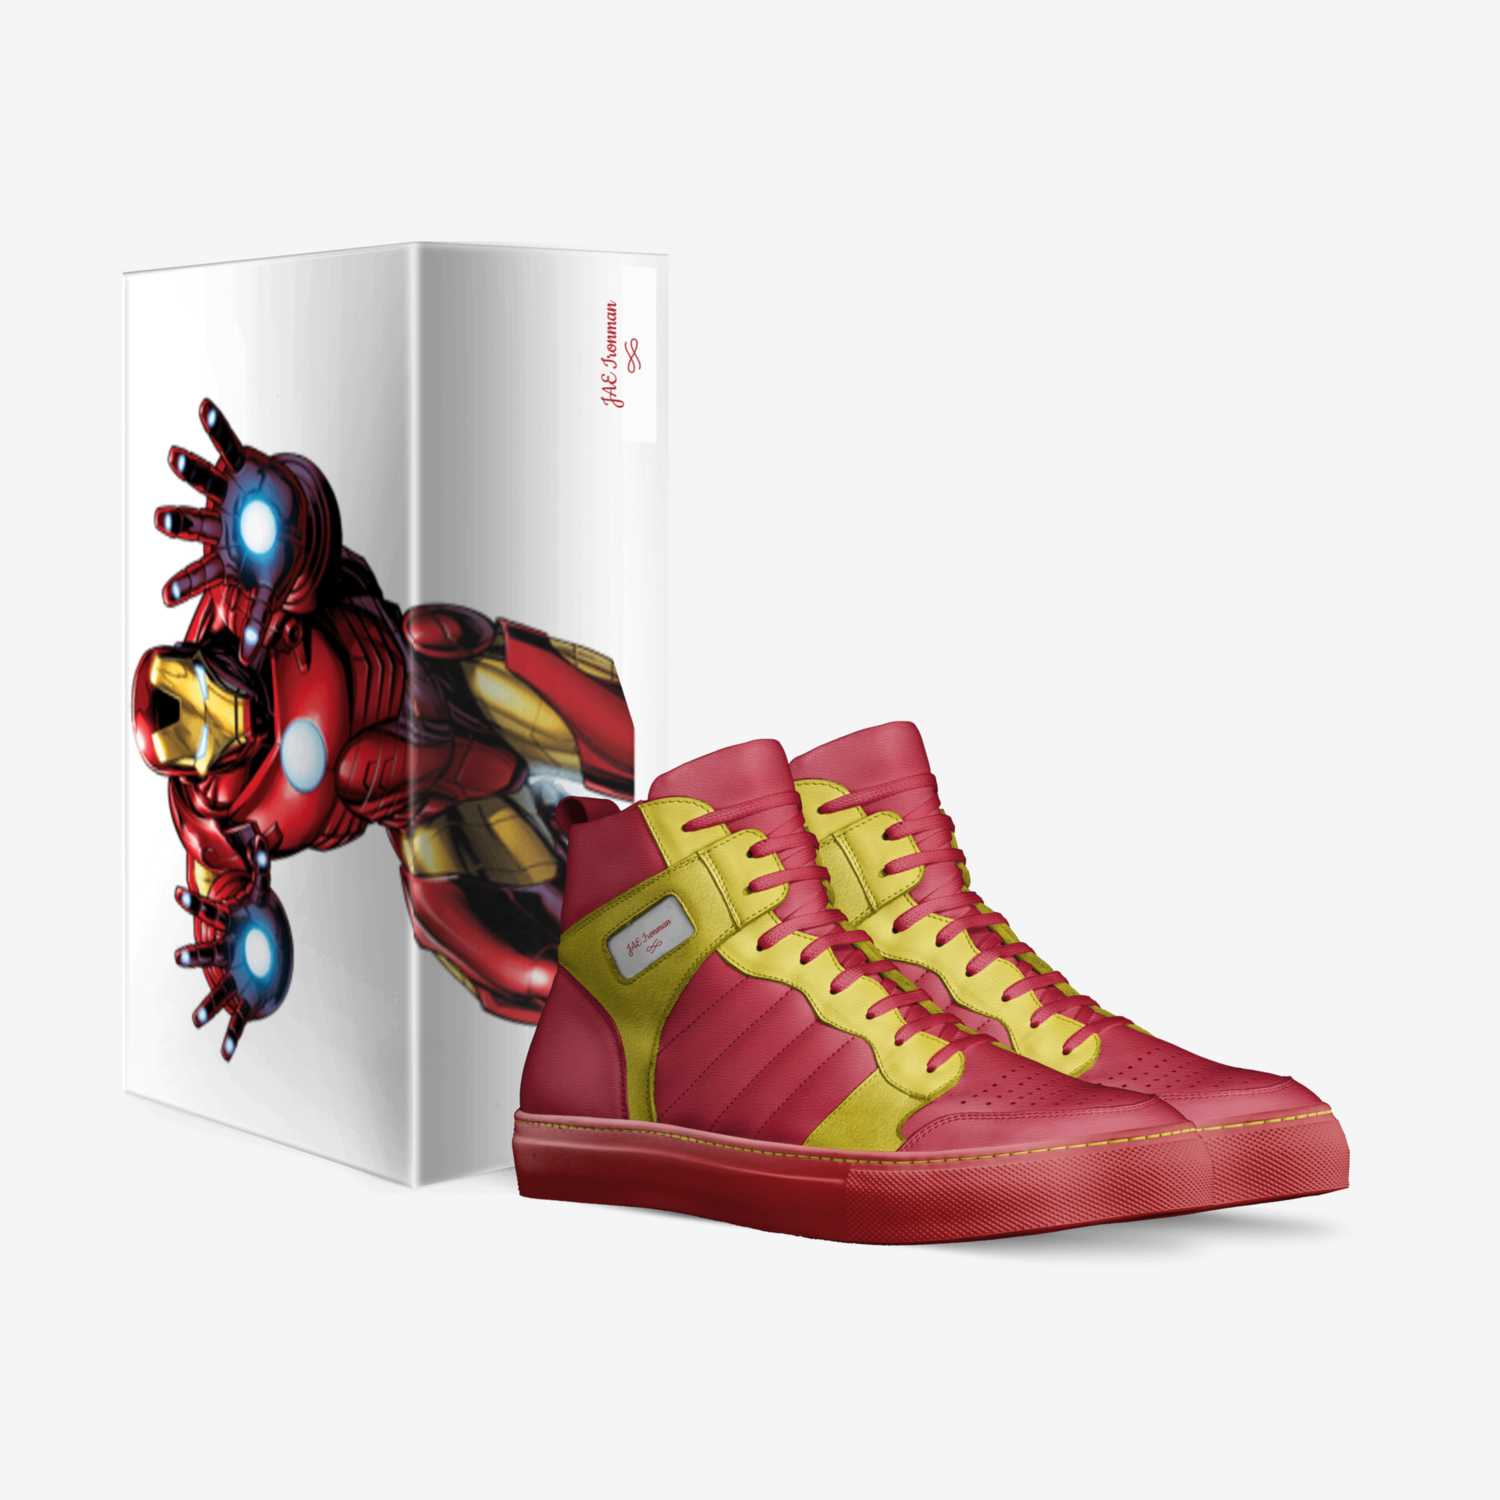 JAE Ironman custom made in Italy shoes by Justin Elder | Box view